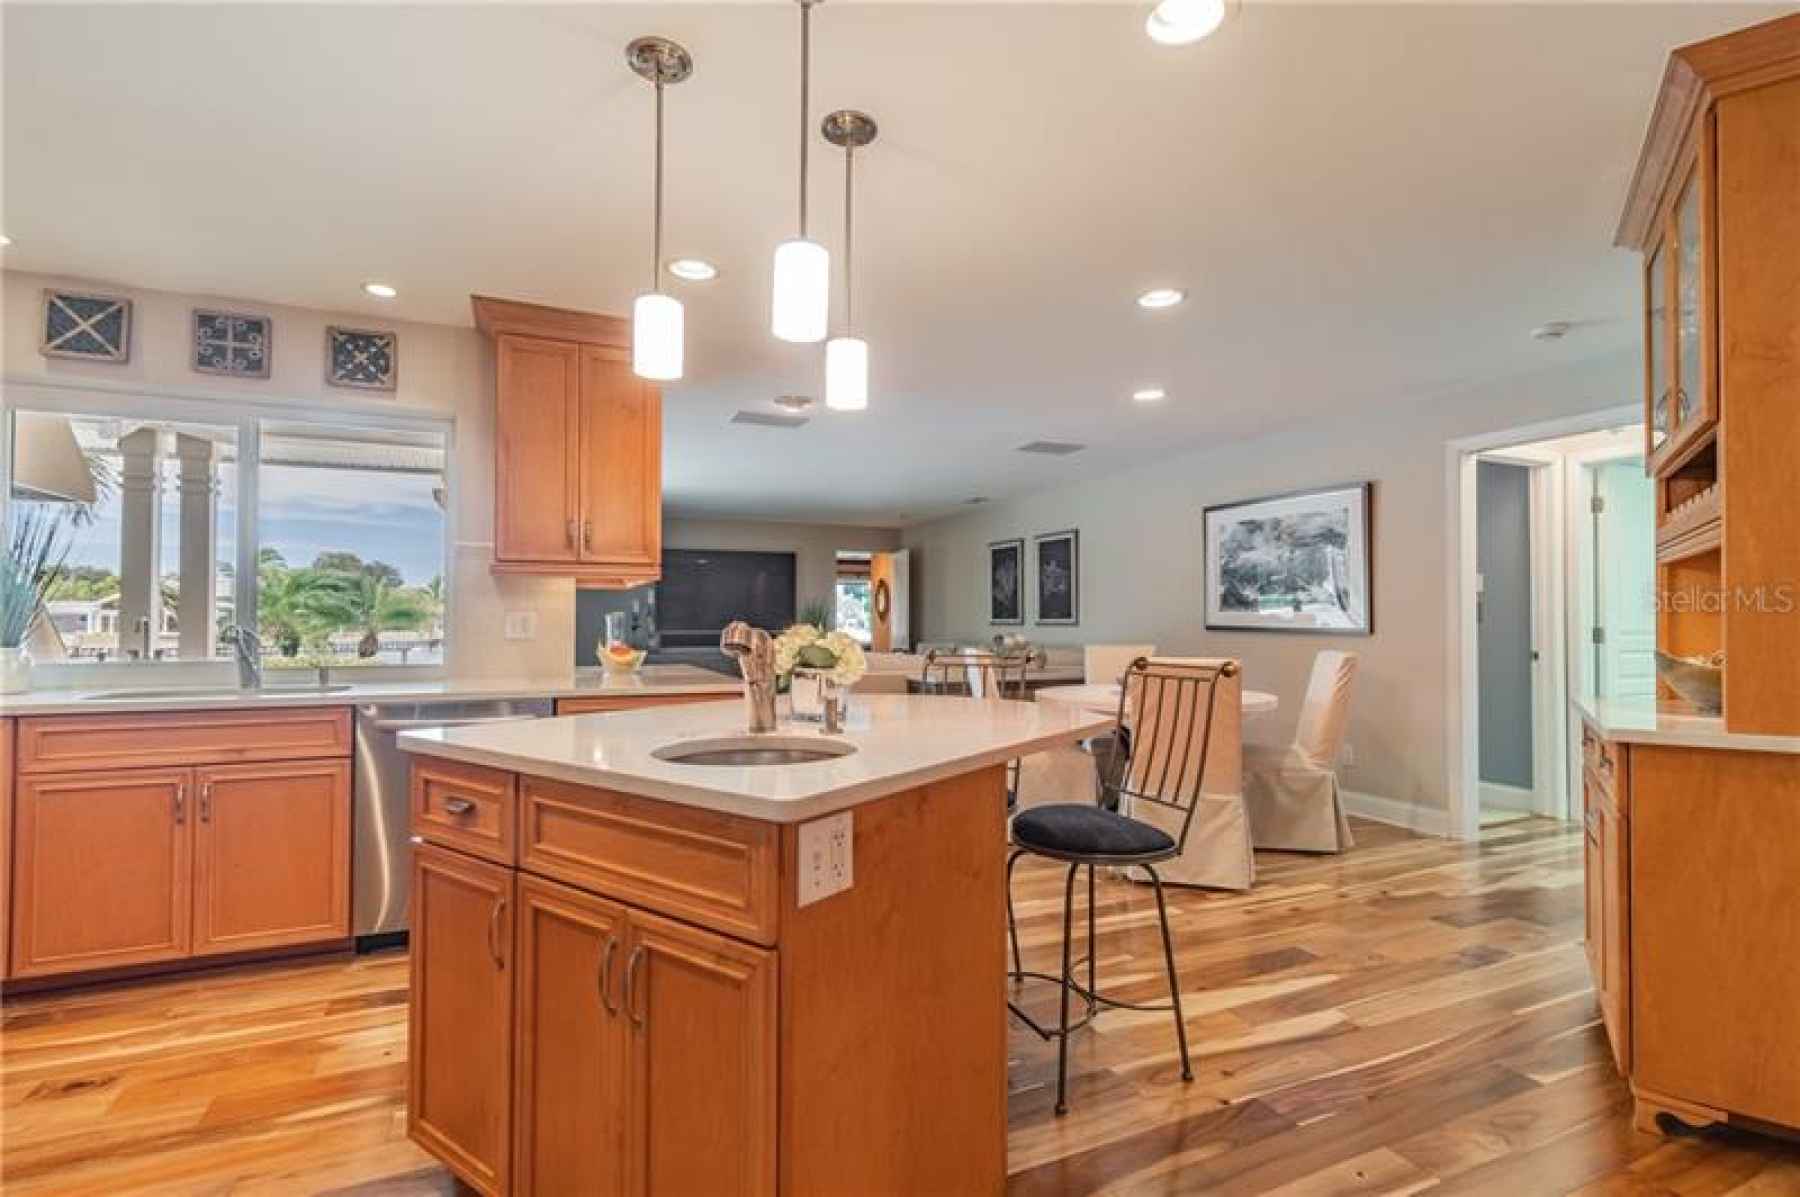 Kitchen/family room with views of sparkling waterfront and easy flow to out door living space, inclu